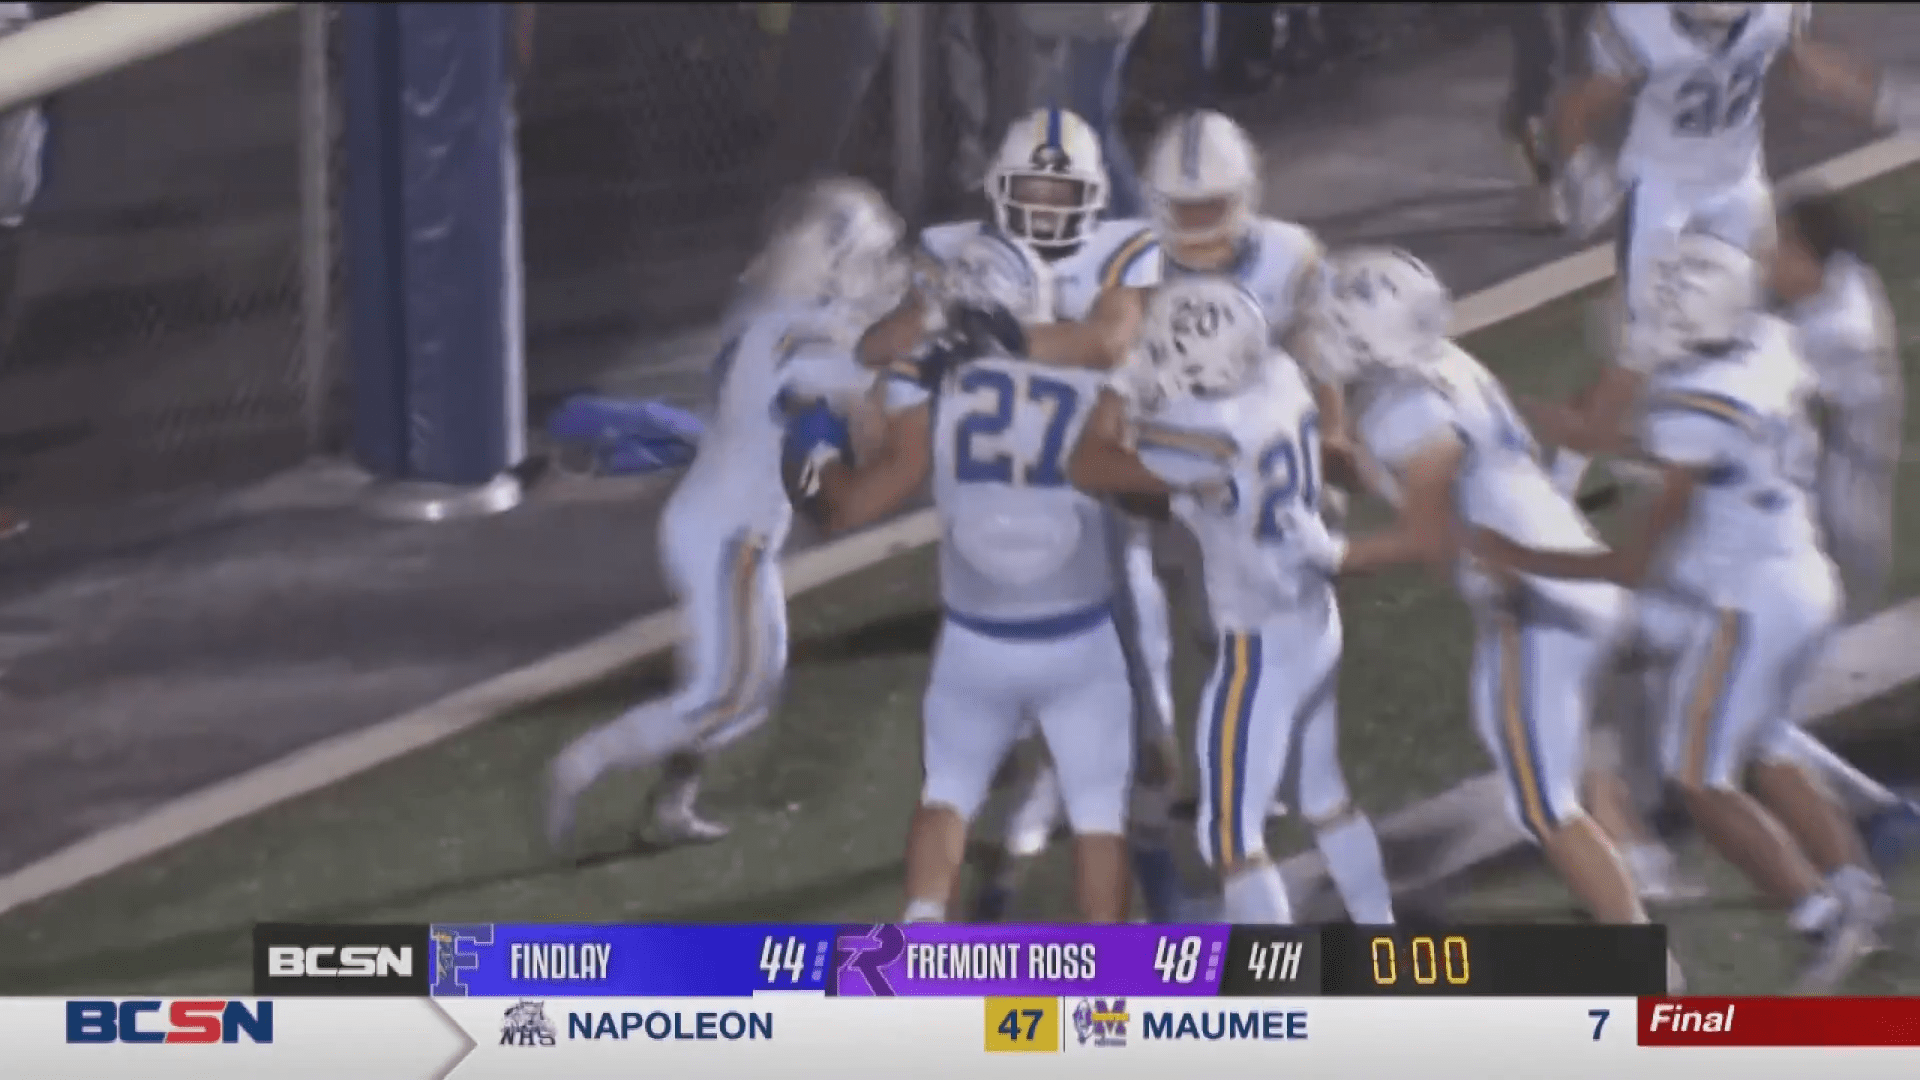 Last Second Lateral Lifts Findlay Over Fremont Ross In Instant Classic Bcsn